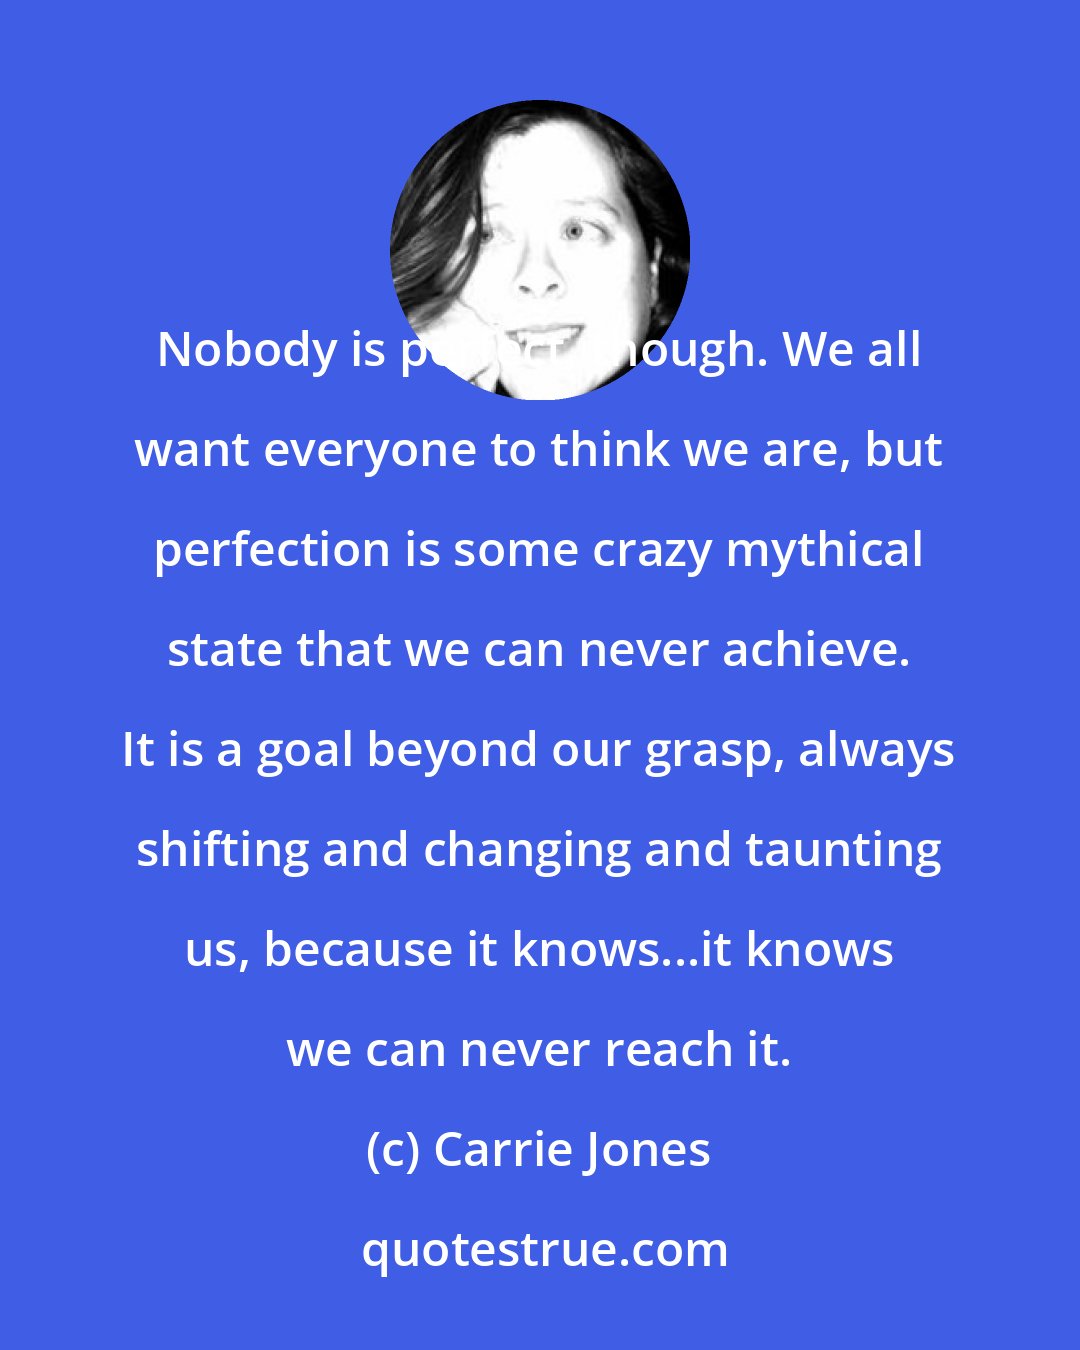 Carrie Jones: Nobody is perfect, though. We all want everyone to think we are, but perfection is some crazy mythical state that we can never achieve. It is a goal beyond our grasp, always shifting and changing and taunting us, because it knows...it knows we can never reach it.